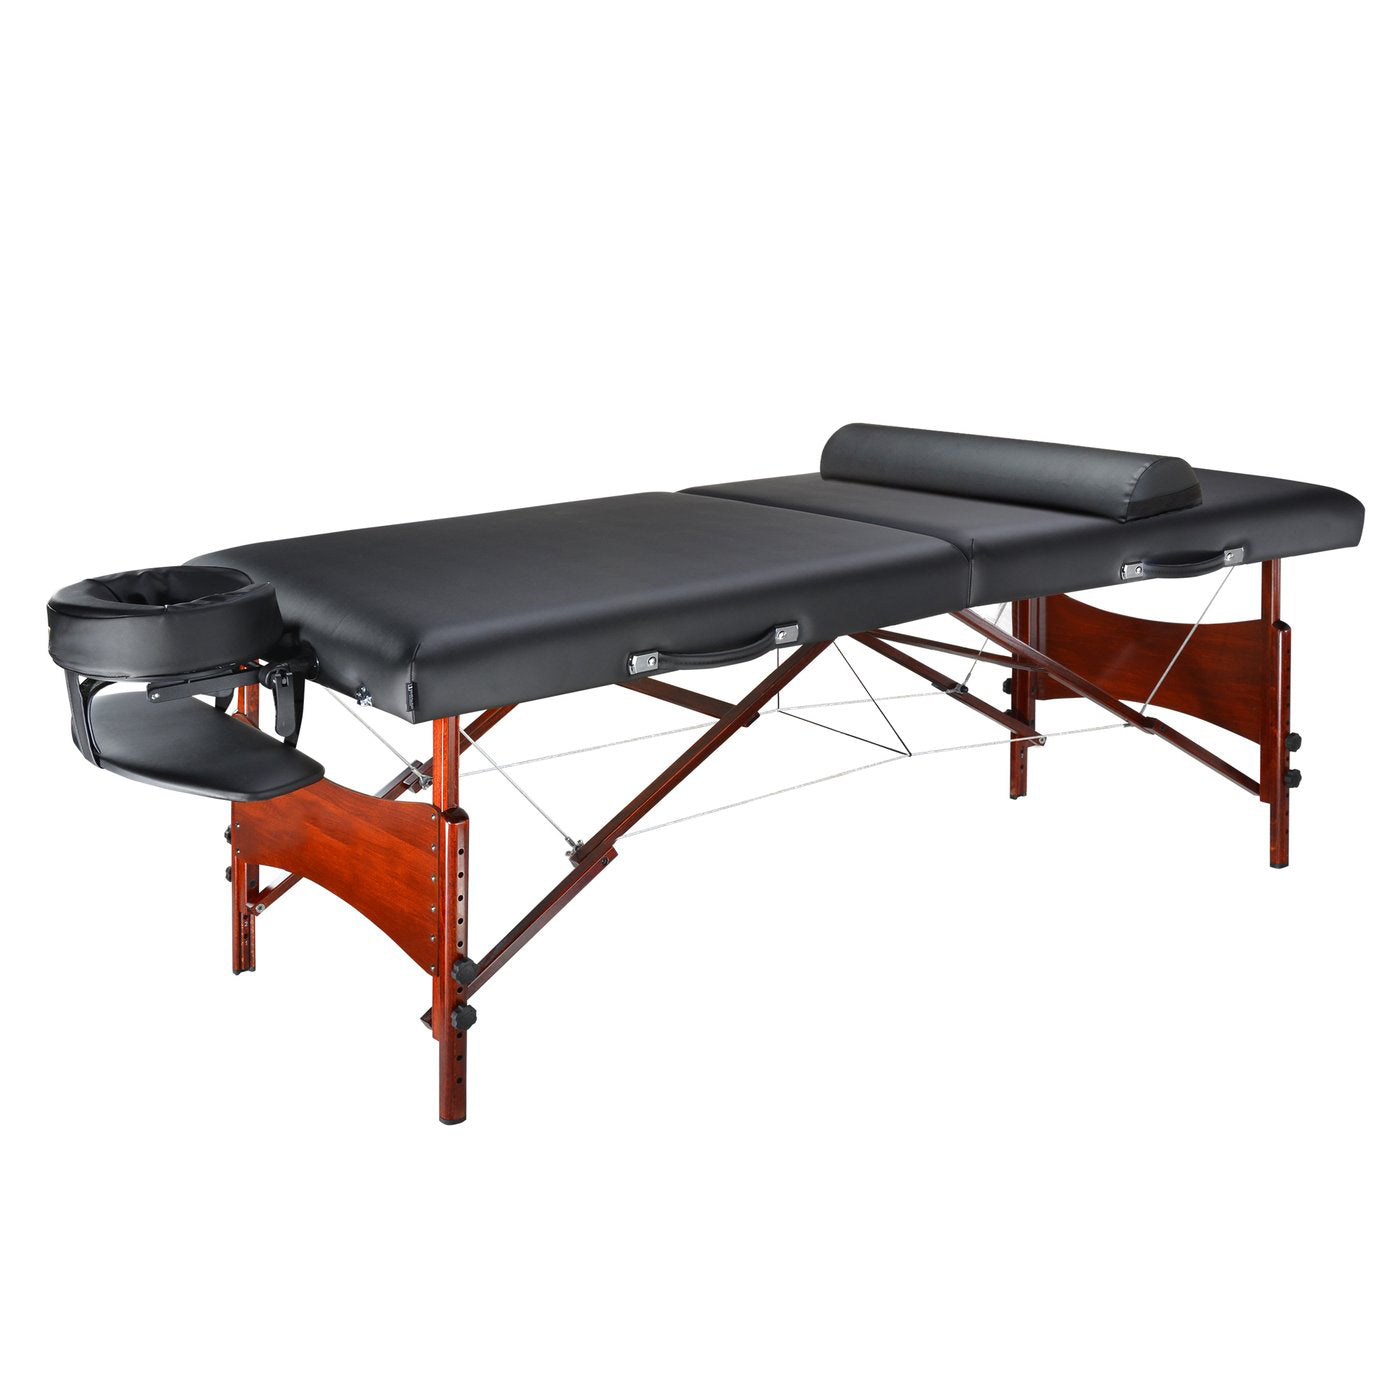 30" Roma™ LX Portable Massage Table Package with Best Selling Size (Black)